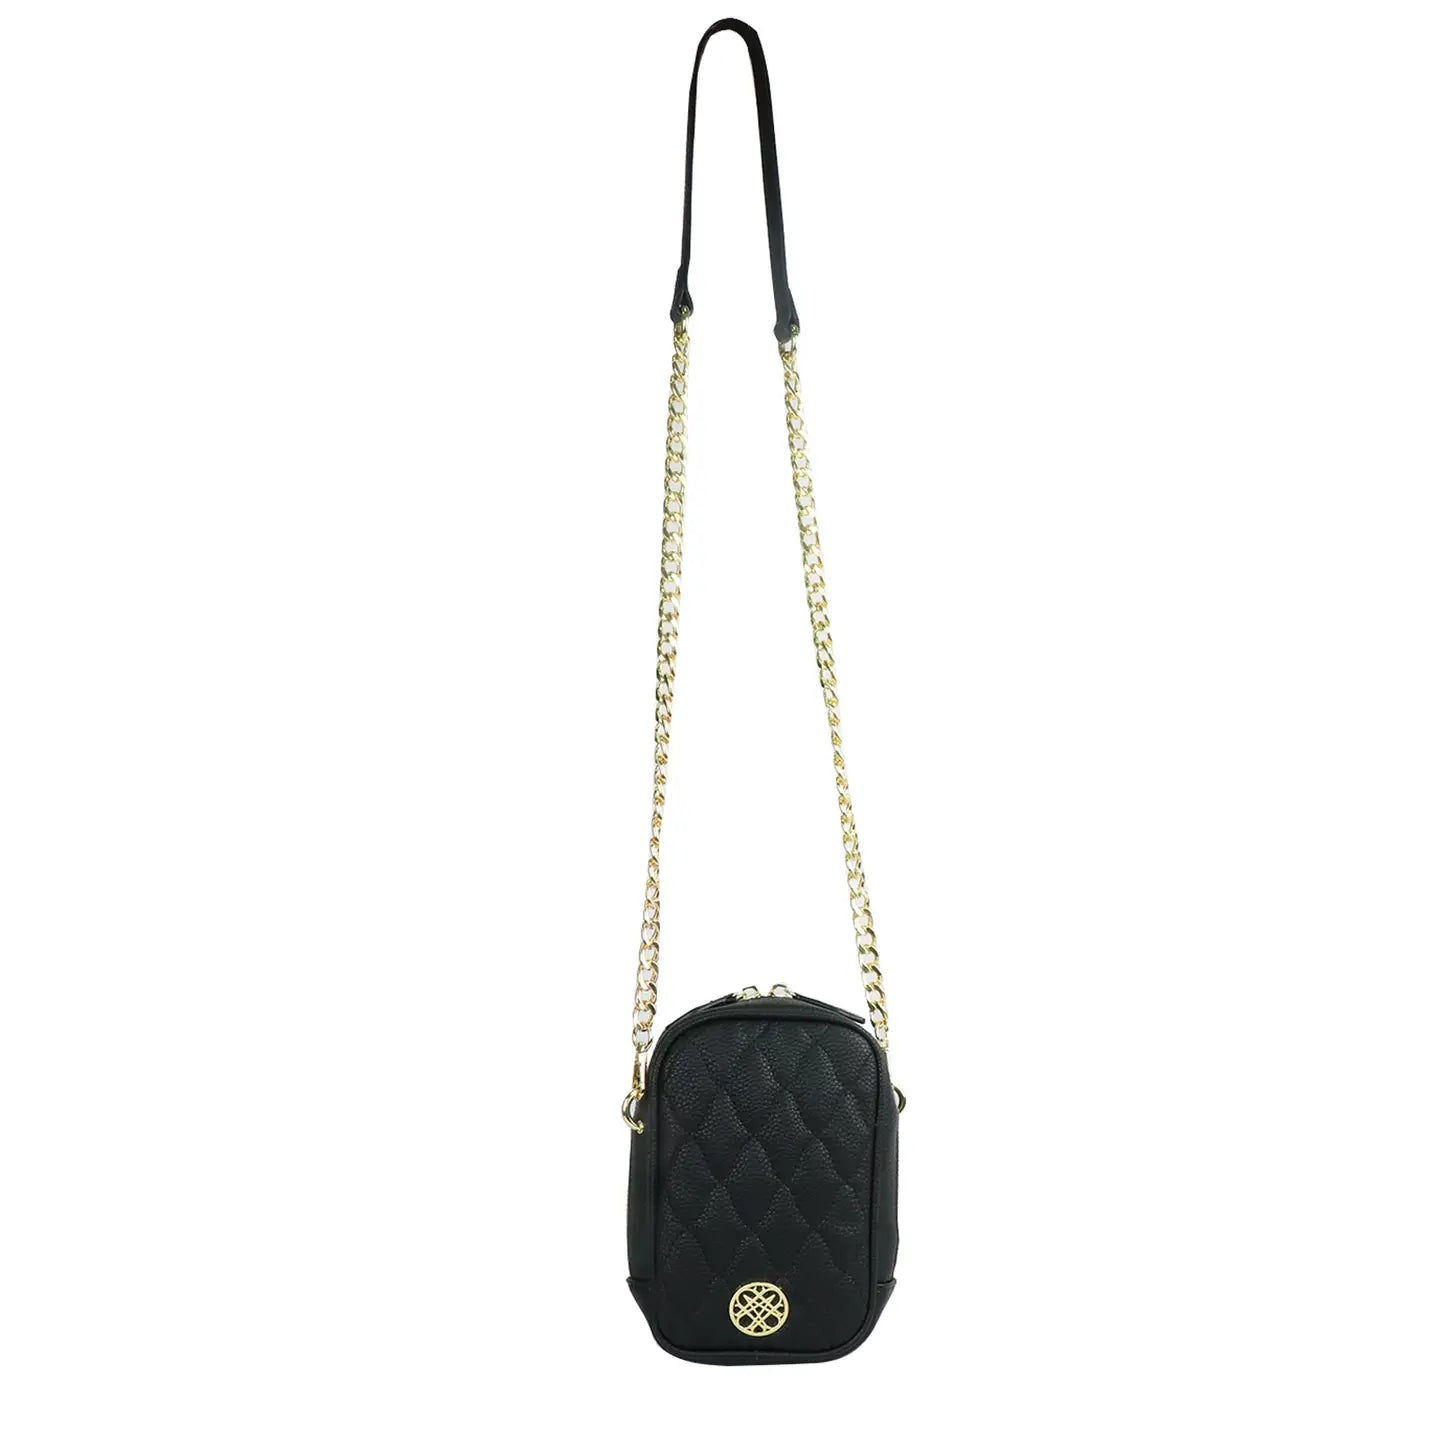 Natalie Wood - Grace Quilted Crossbody in Black-130 Accessories-Natalie Wood-July & June Women's Fashion Boutique Located in San Antonio, Texas